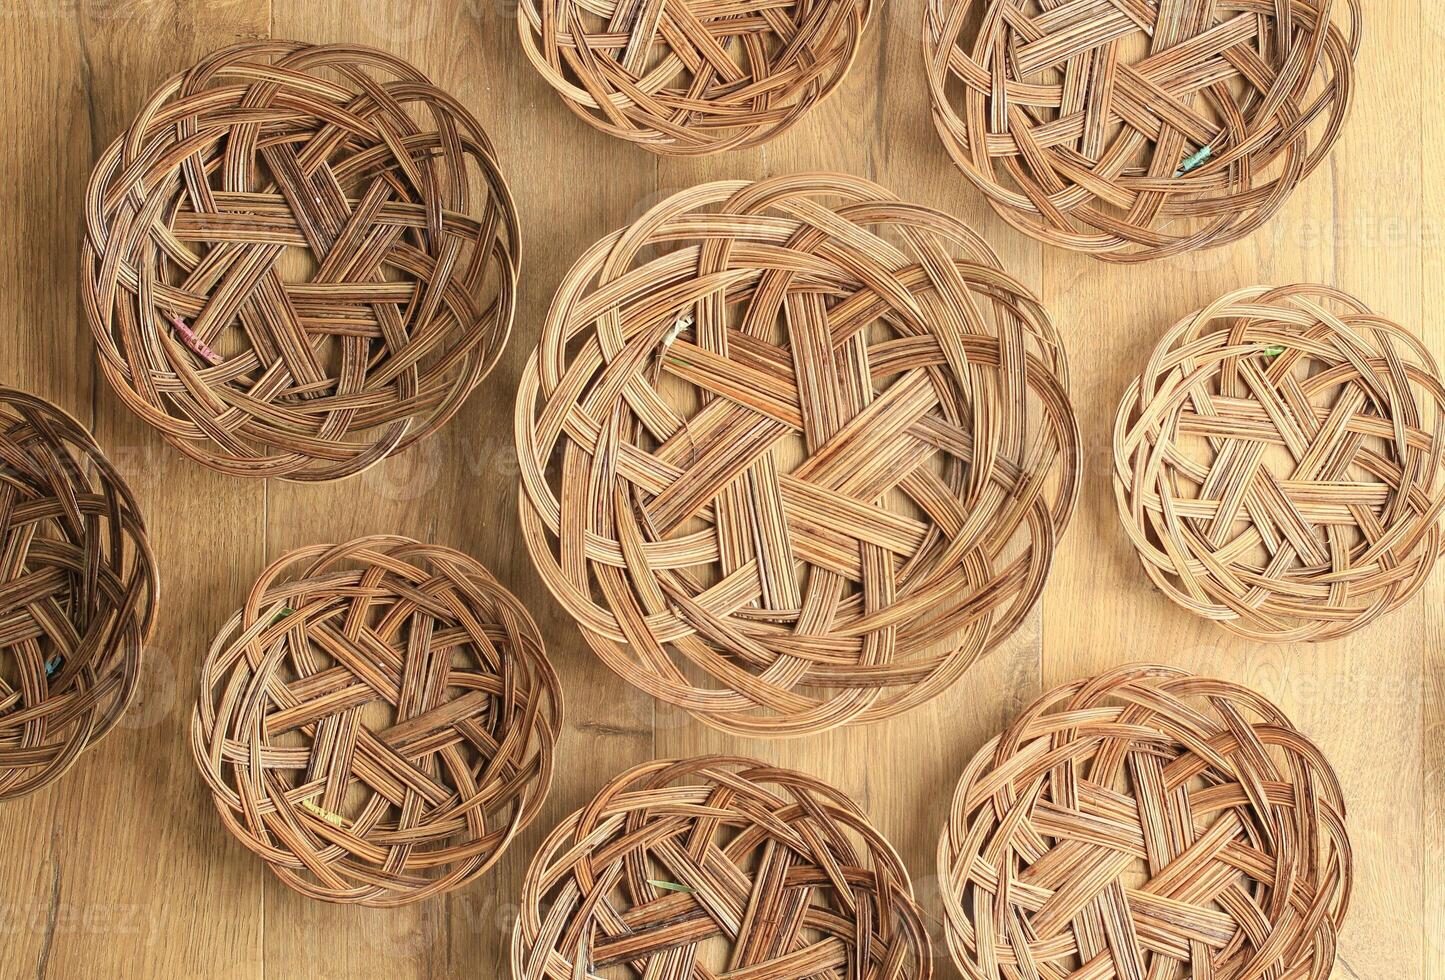 Piring Lidi, Natural Woven Plate made from Palm Leaf Bone photo